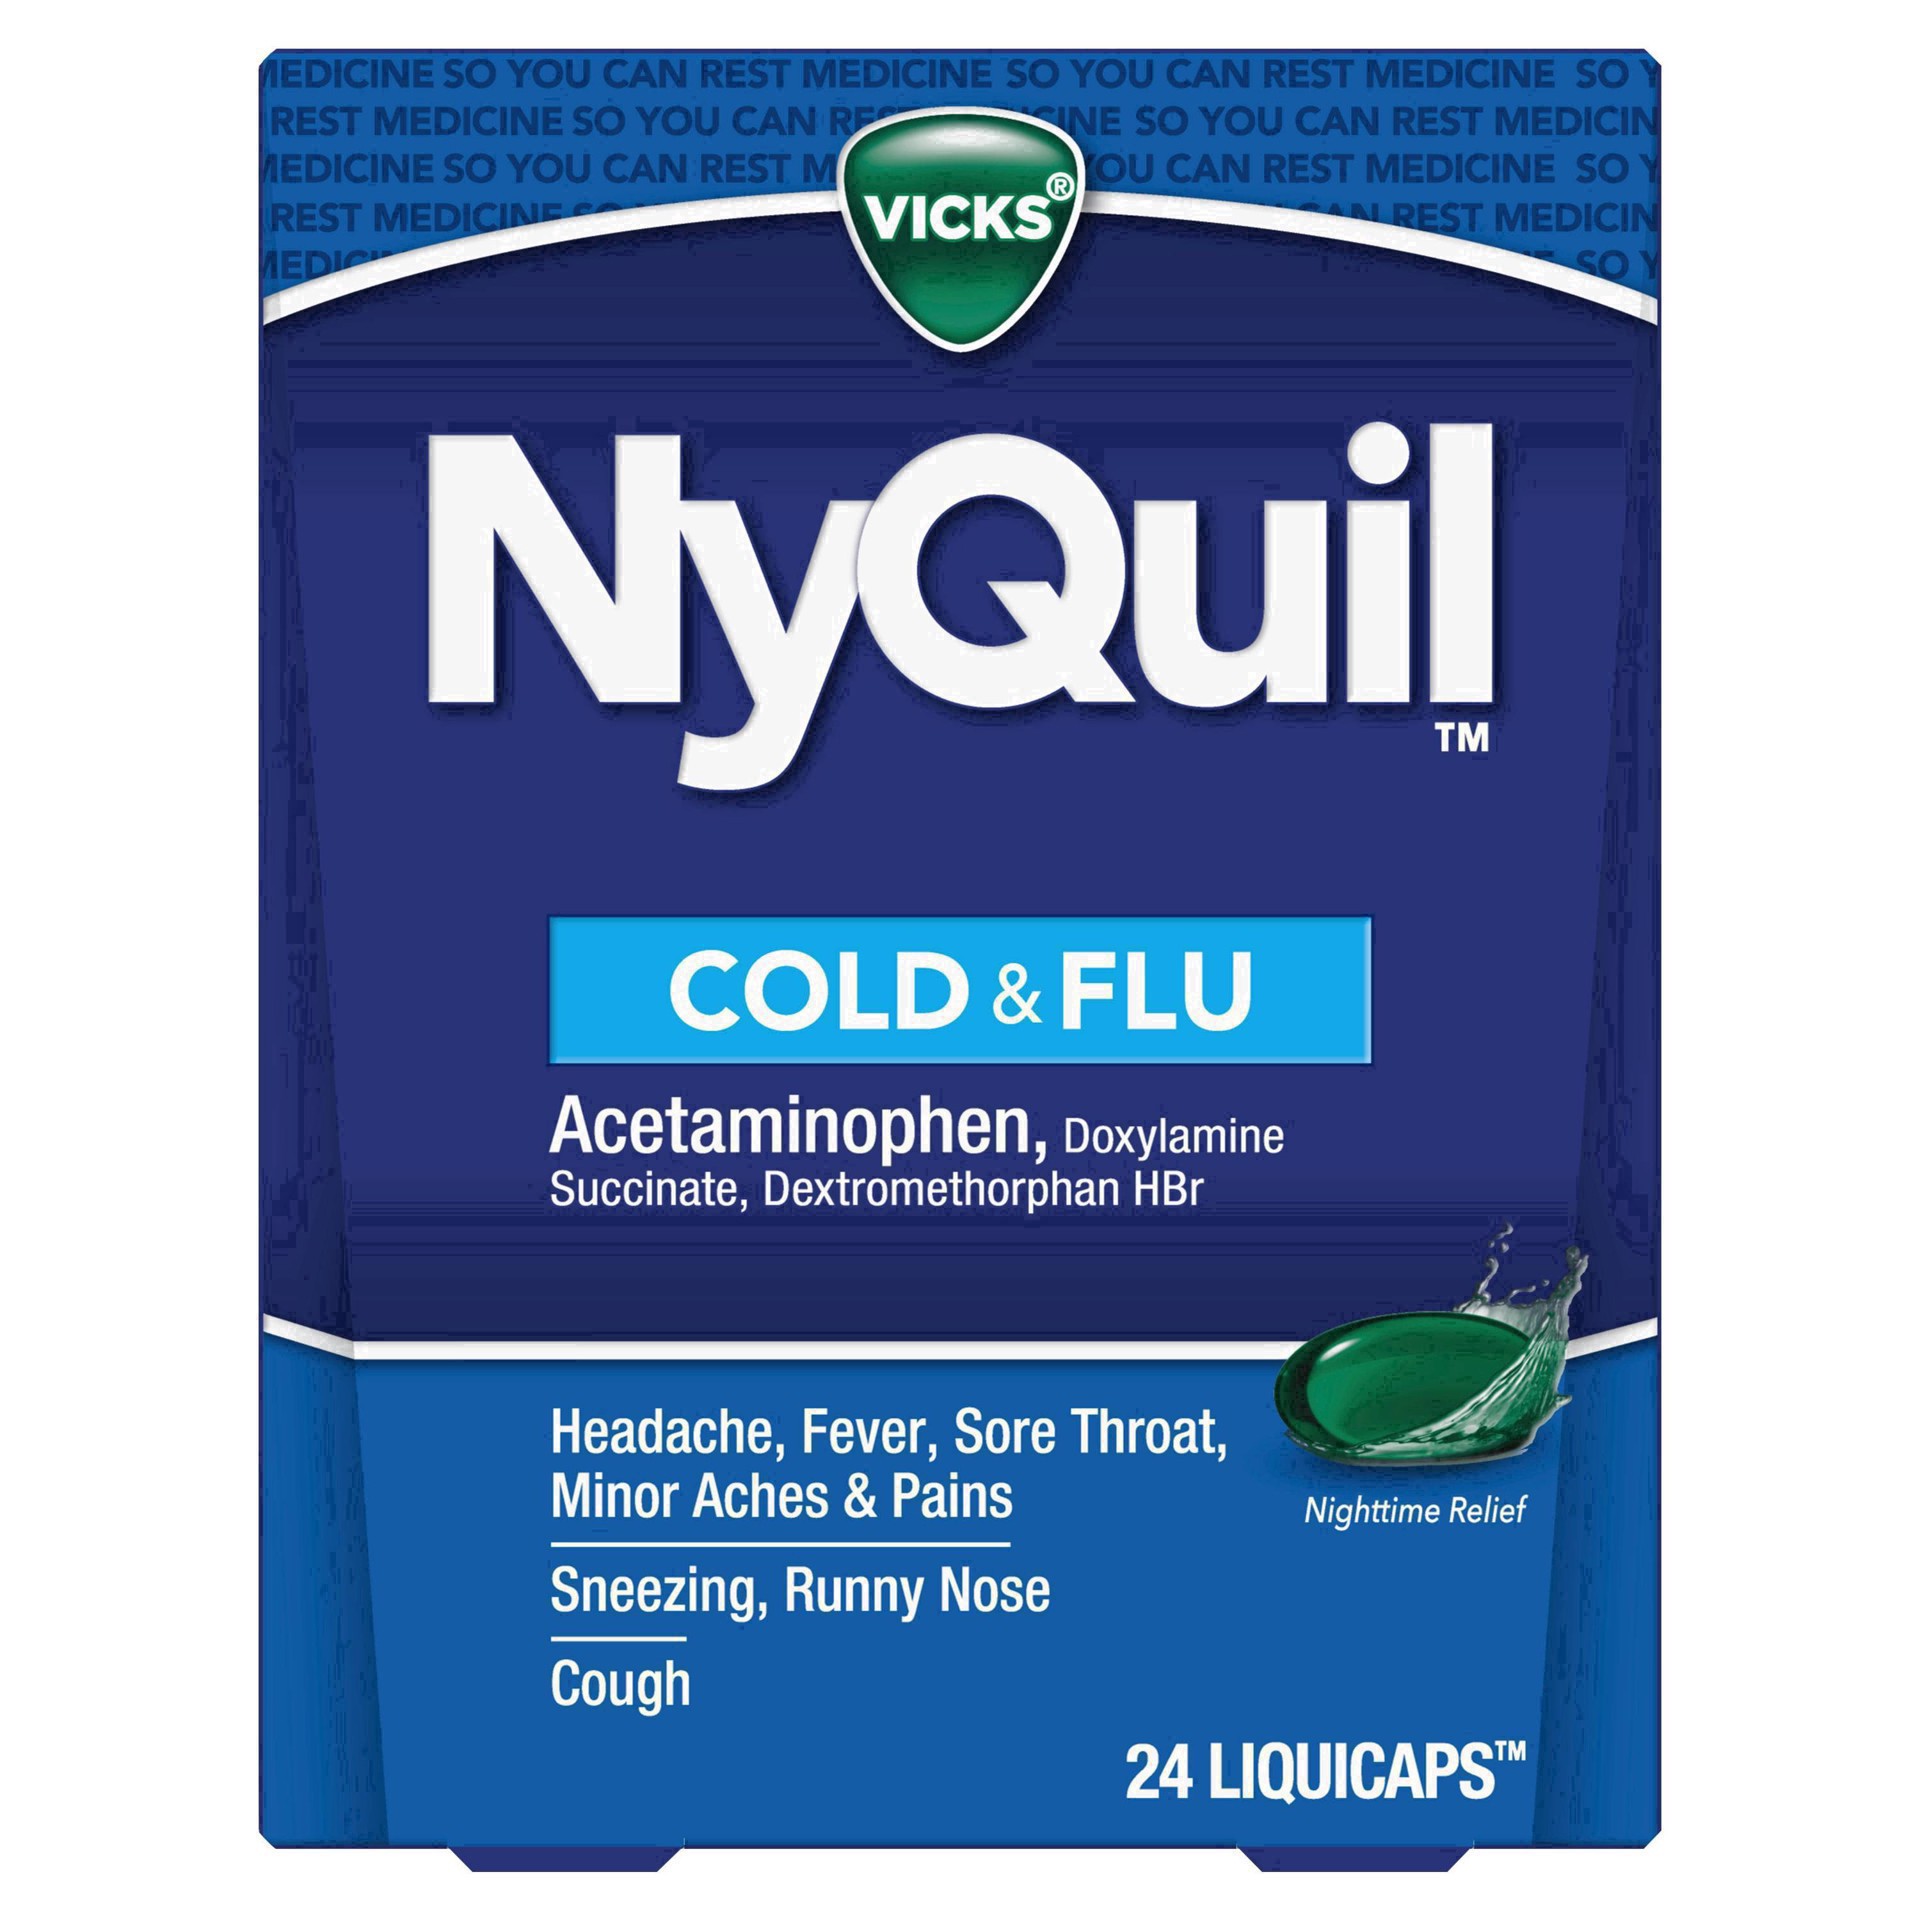 slide 12 of 68, NyQuil Vicks NyQuil Cold & Flu Medicine LiquiCaps - 24ct, 24 ct